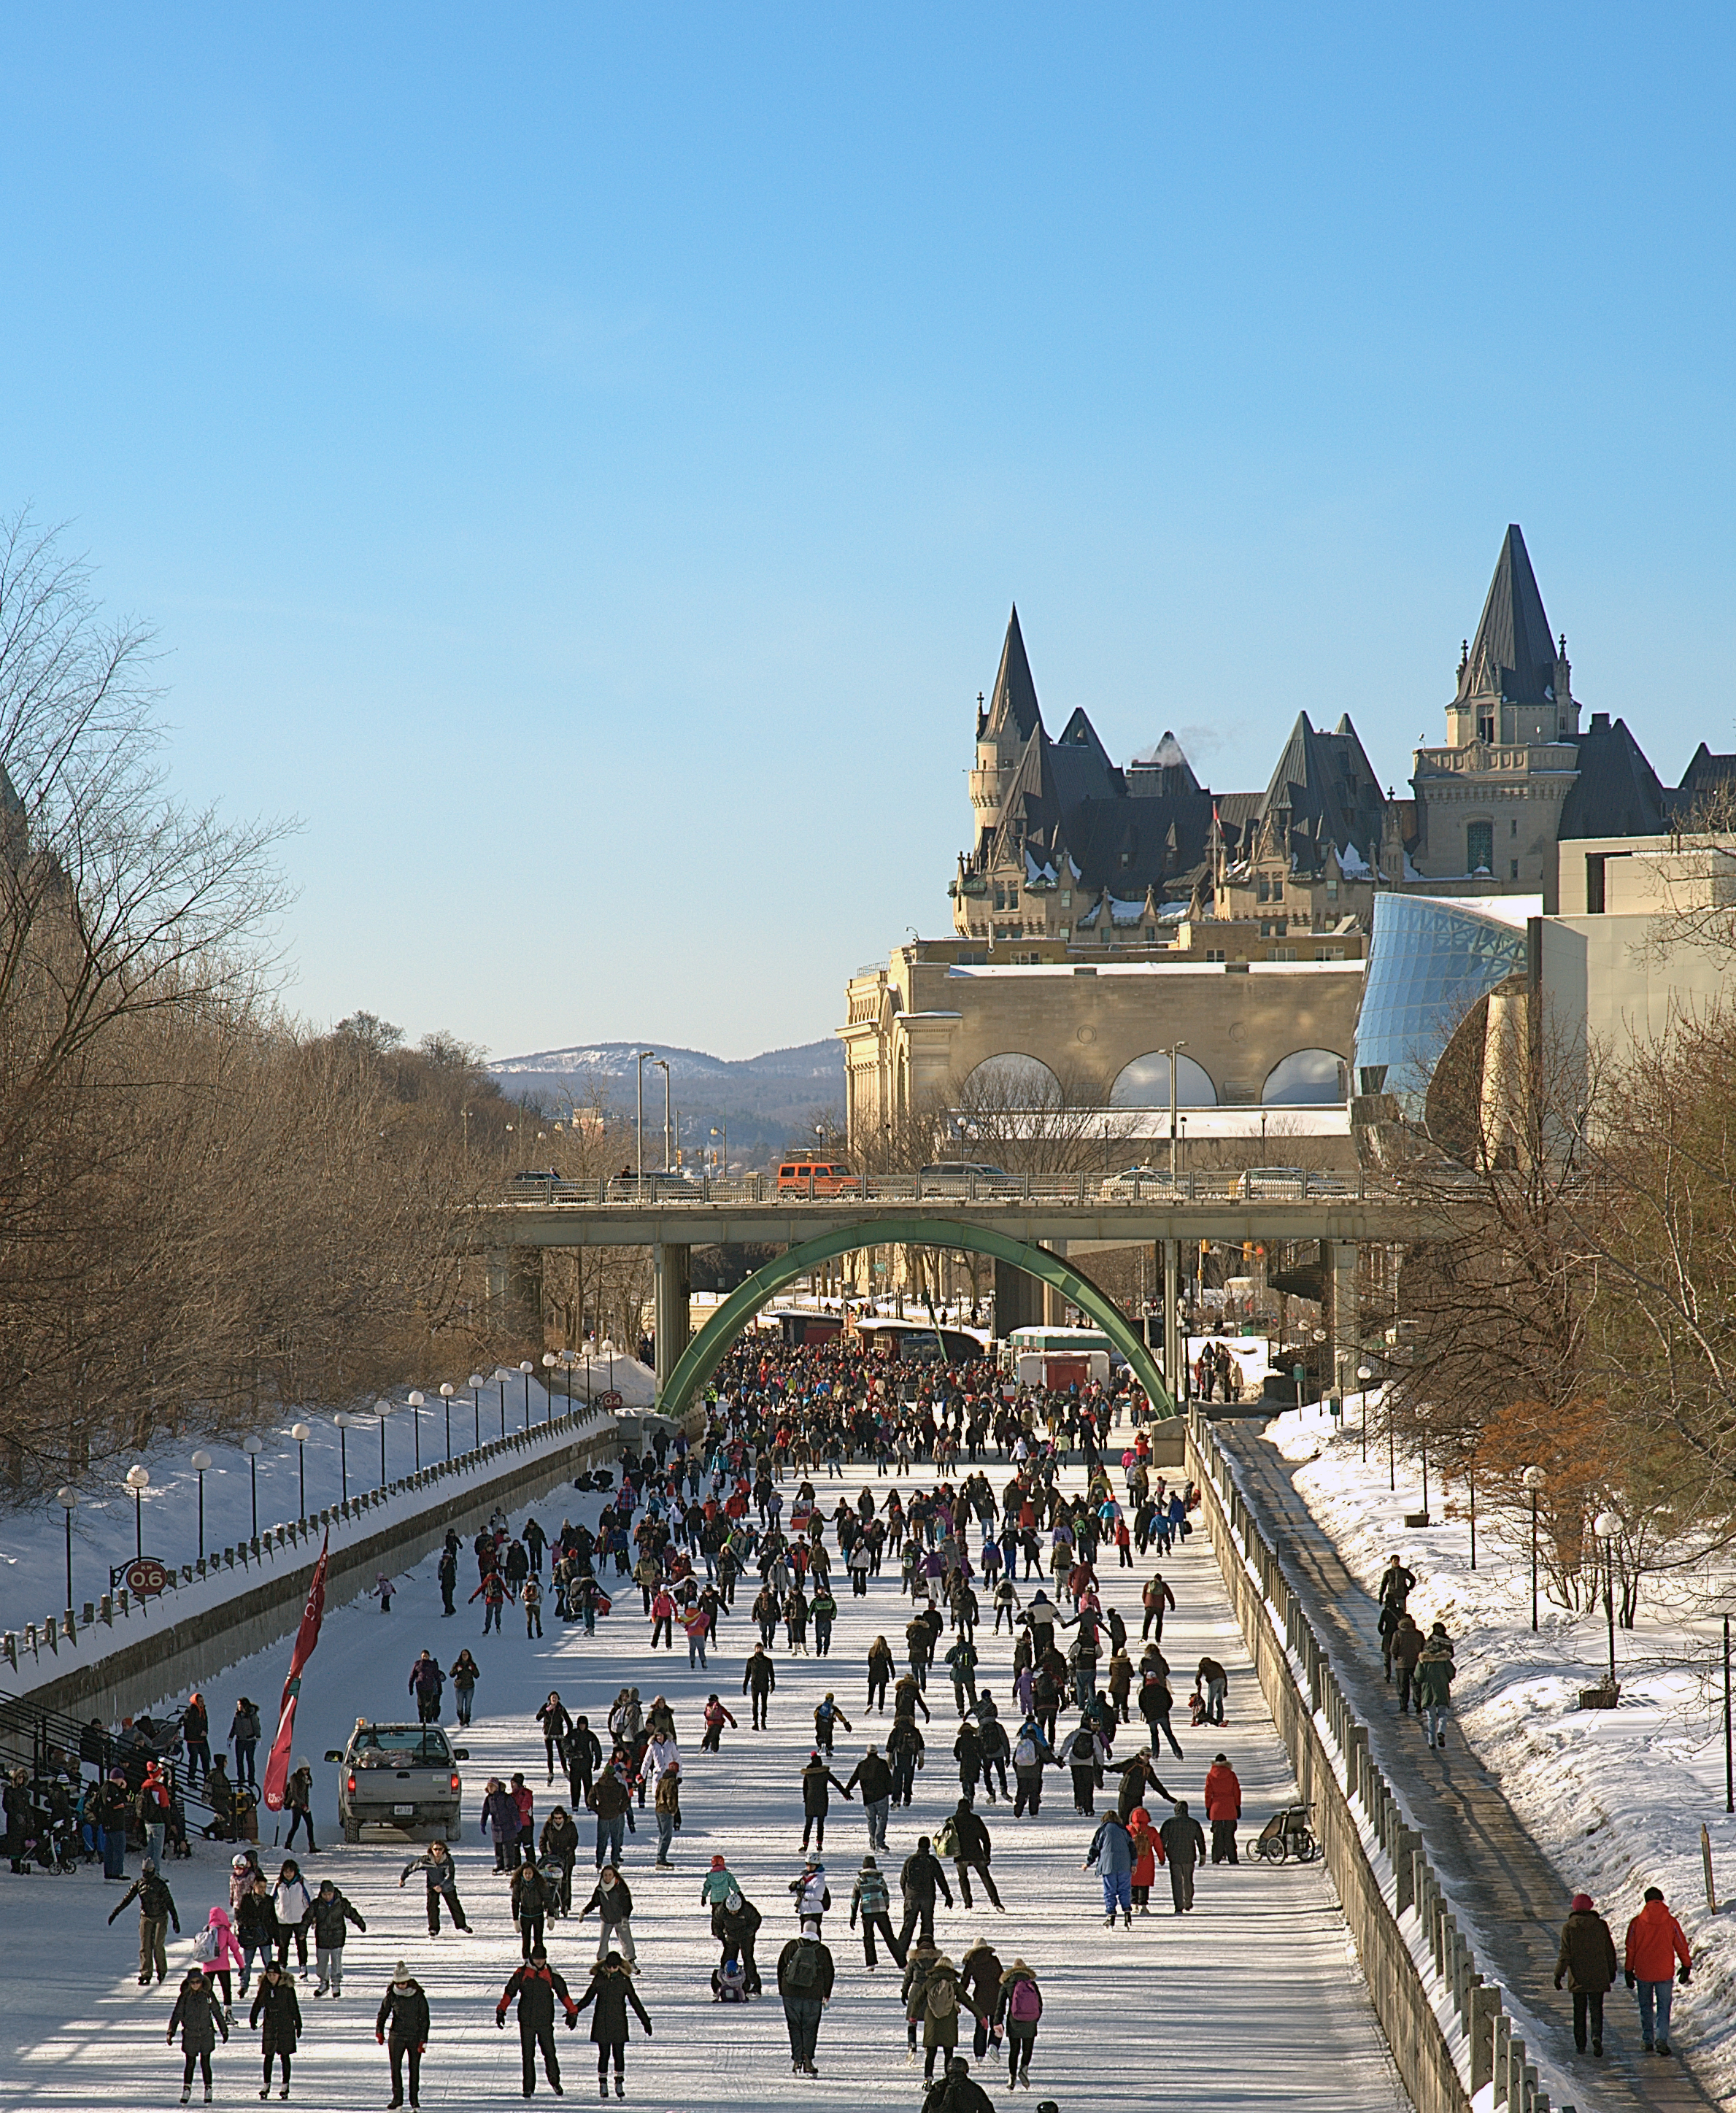 Skating on the Rideau Canal in Ottawa, Canada. (Photo by Saffron Blaze / Source: Wikimedia Commons)